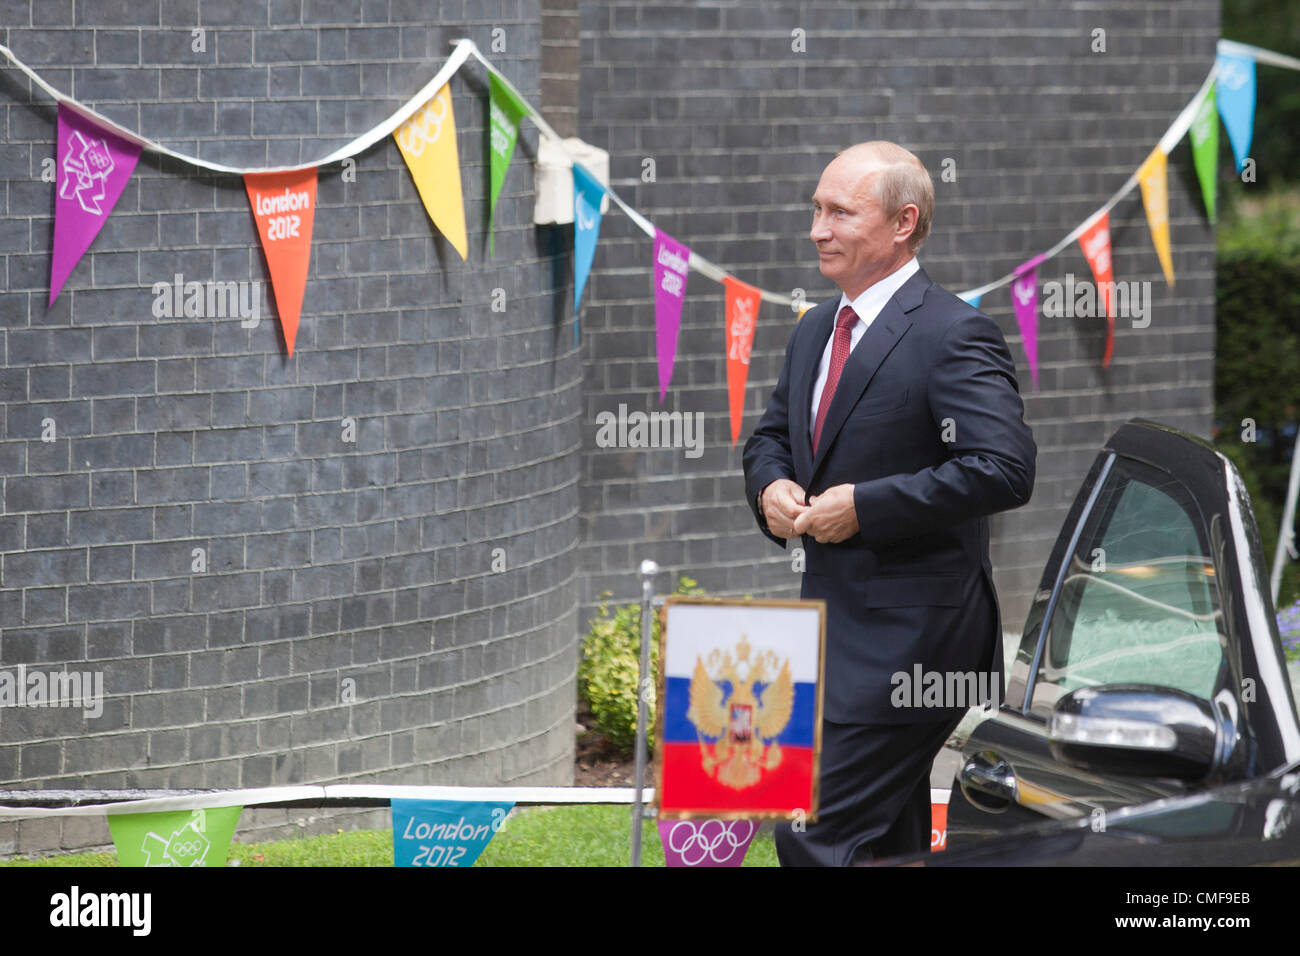 2nd August 2012. London, England, UK. Thursday, 2 August 2012. Vladimir Putin arrives at Downing Street. Vladimir Putin, President of Russia, meets with Prime Minister David Cameron for talks at Downing Street, London before visiting the Olympic Games to watch some judo competitions. Credit:  Nick Savage / Alamy Live News. Stock Photo